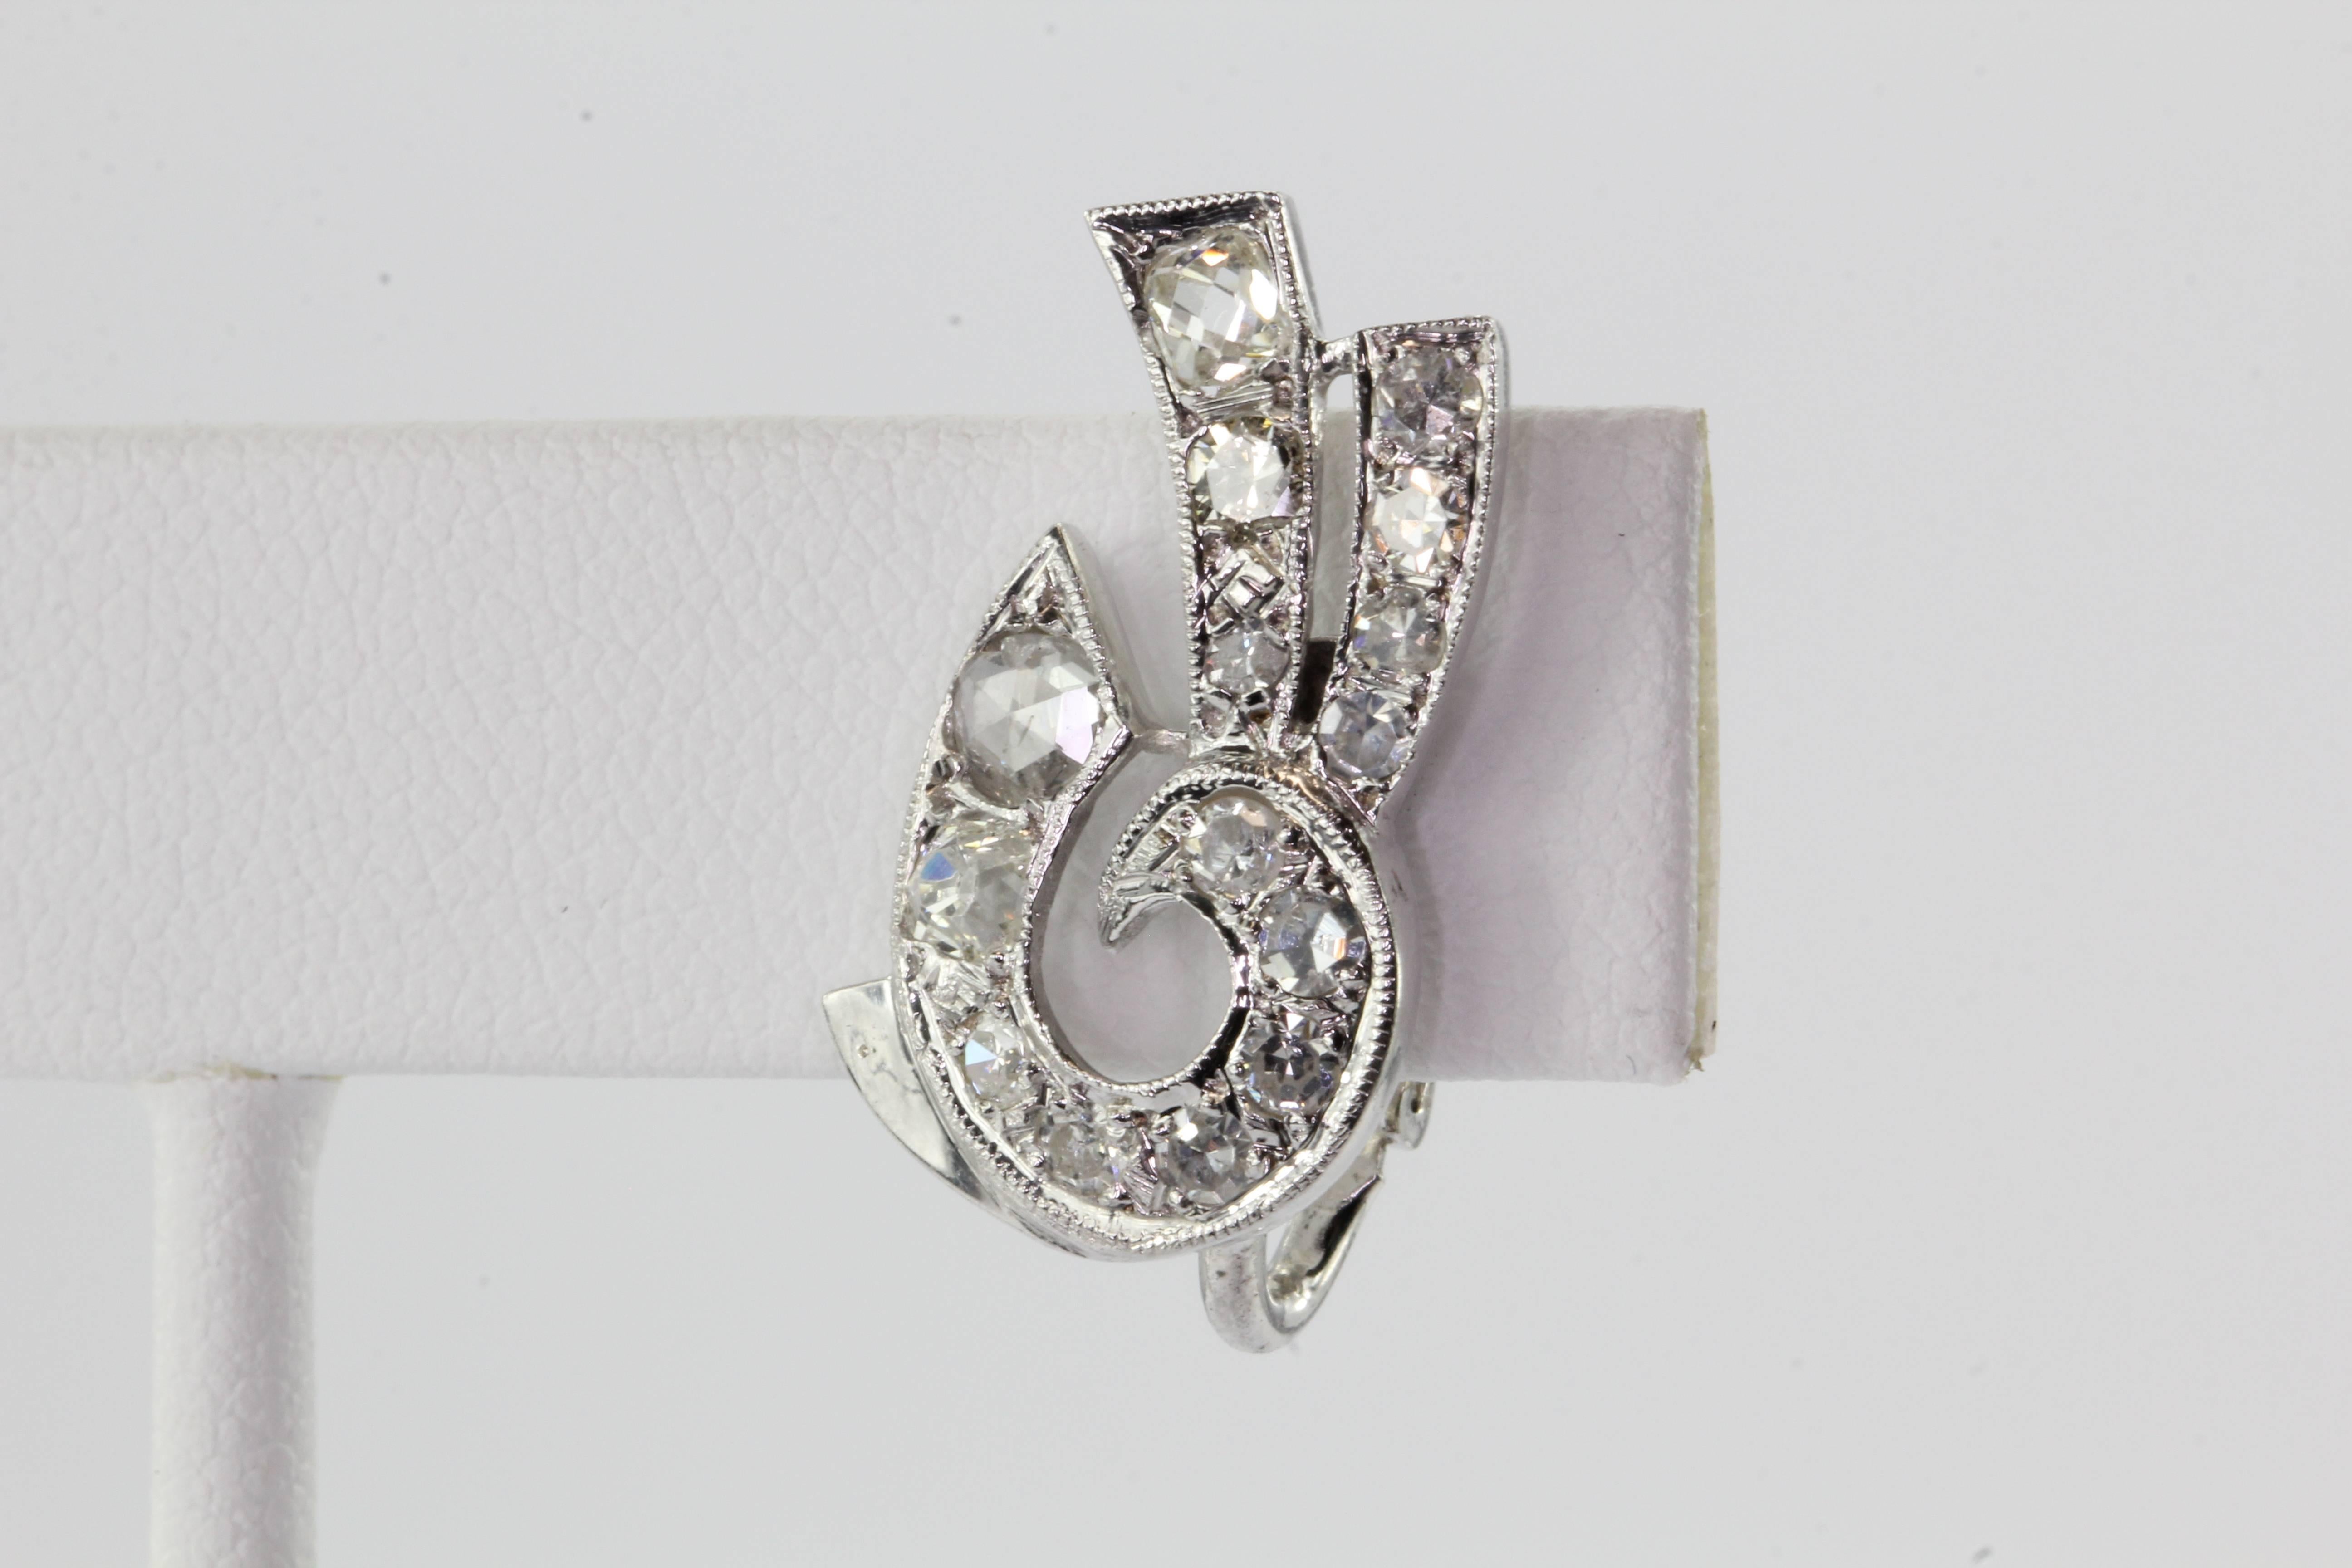 Art Deco 14K White Gold Rose & Old Mine Cut Diamond Earrings. The earrings are in excellent antique estate condition and ready to wear. The earrings are hallmarked 14K. The earring backs are most likely a later addition. The earrings are set